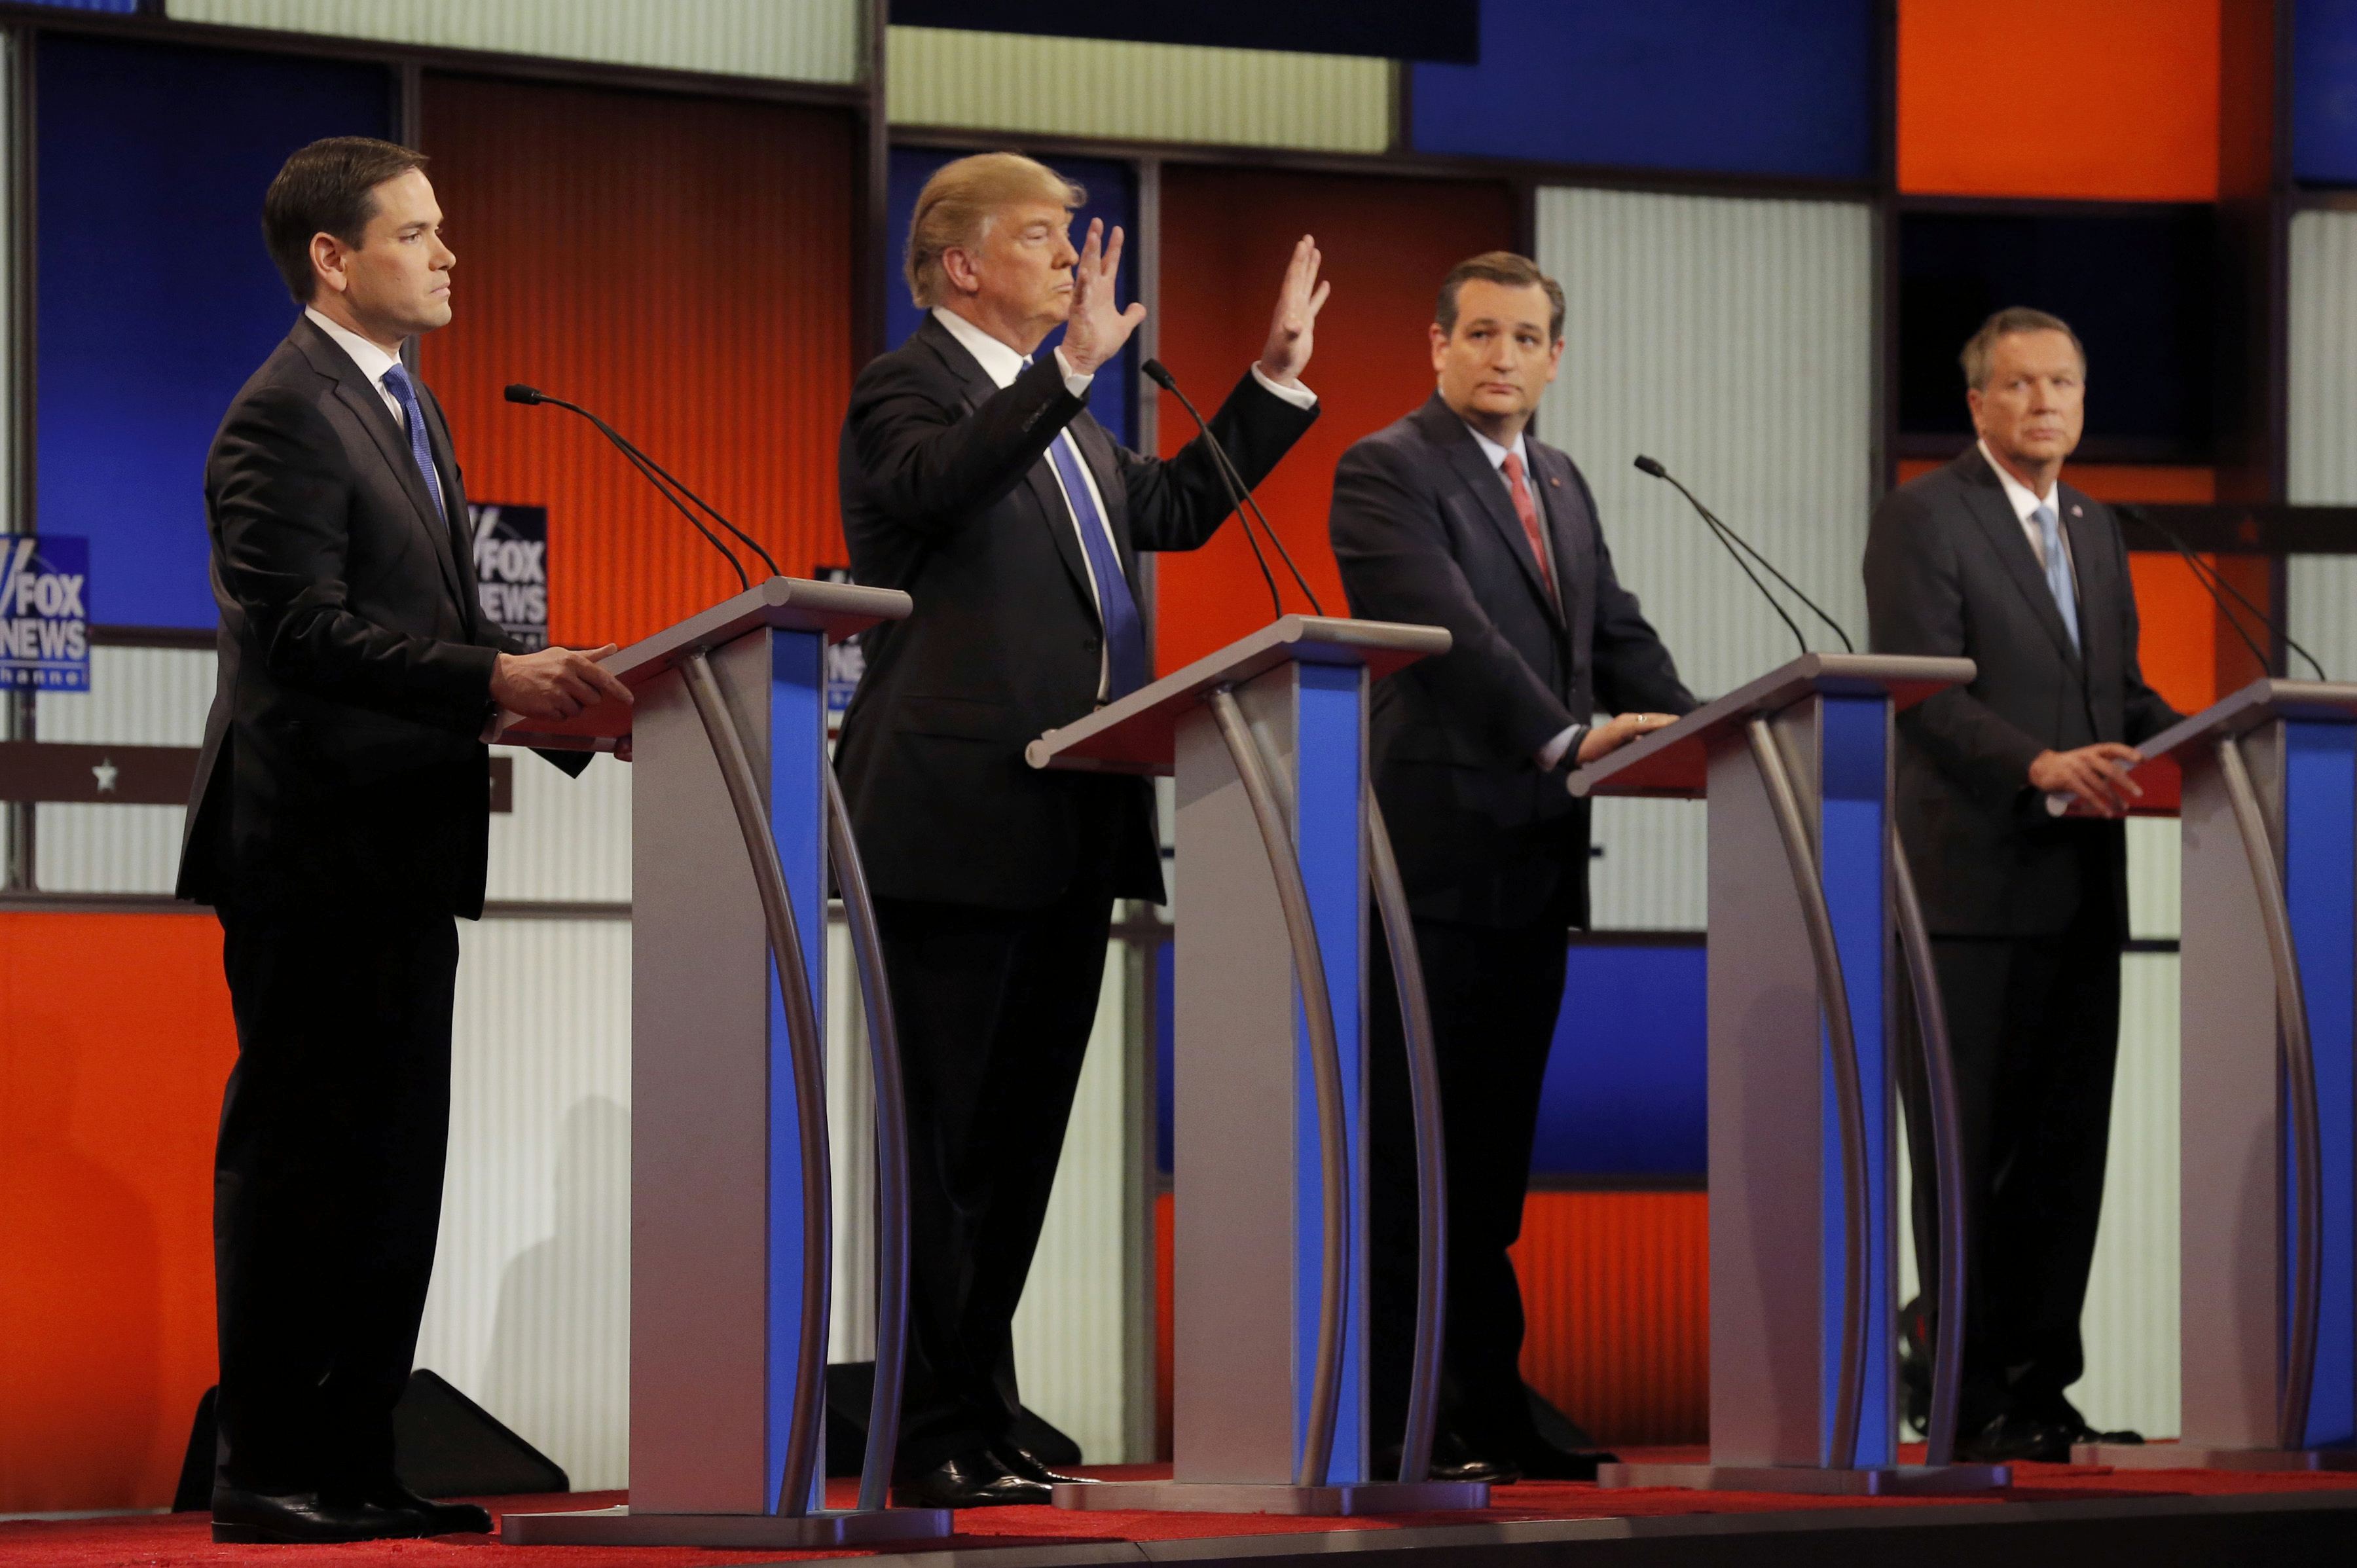 Republican debate Donald Trump defends the size of his hands, and more